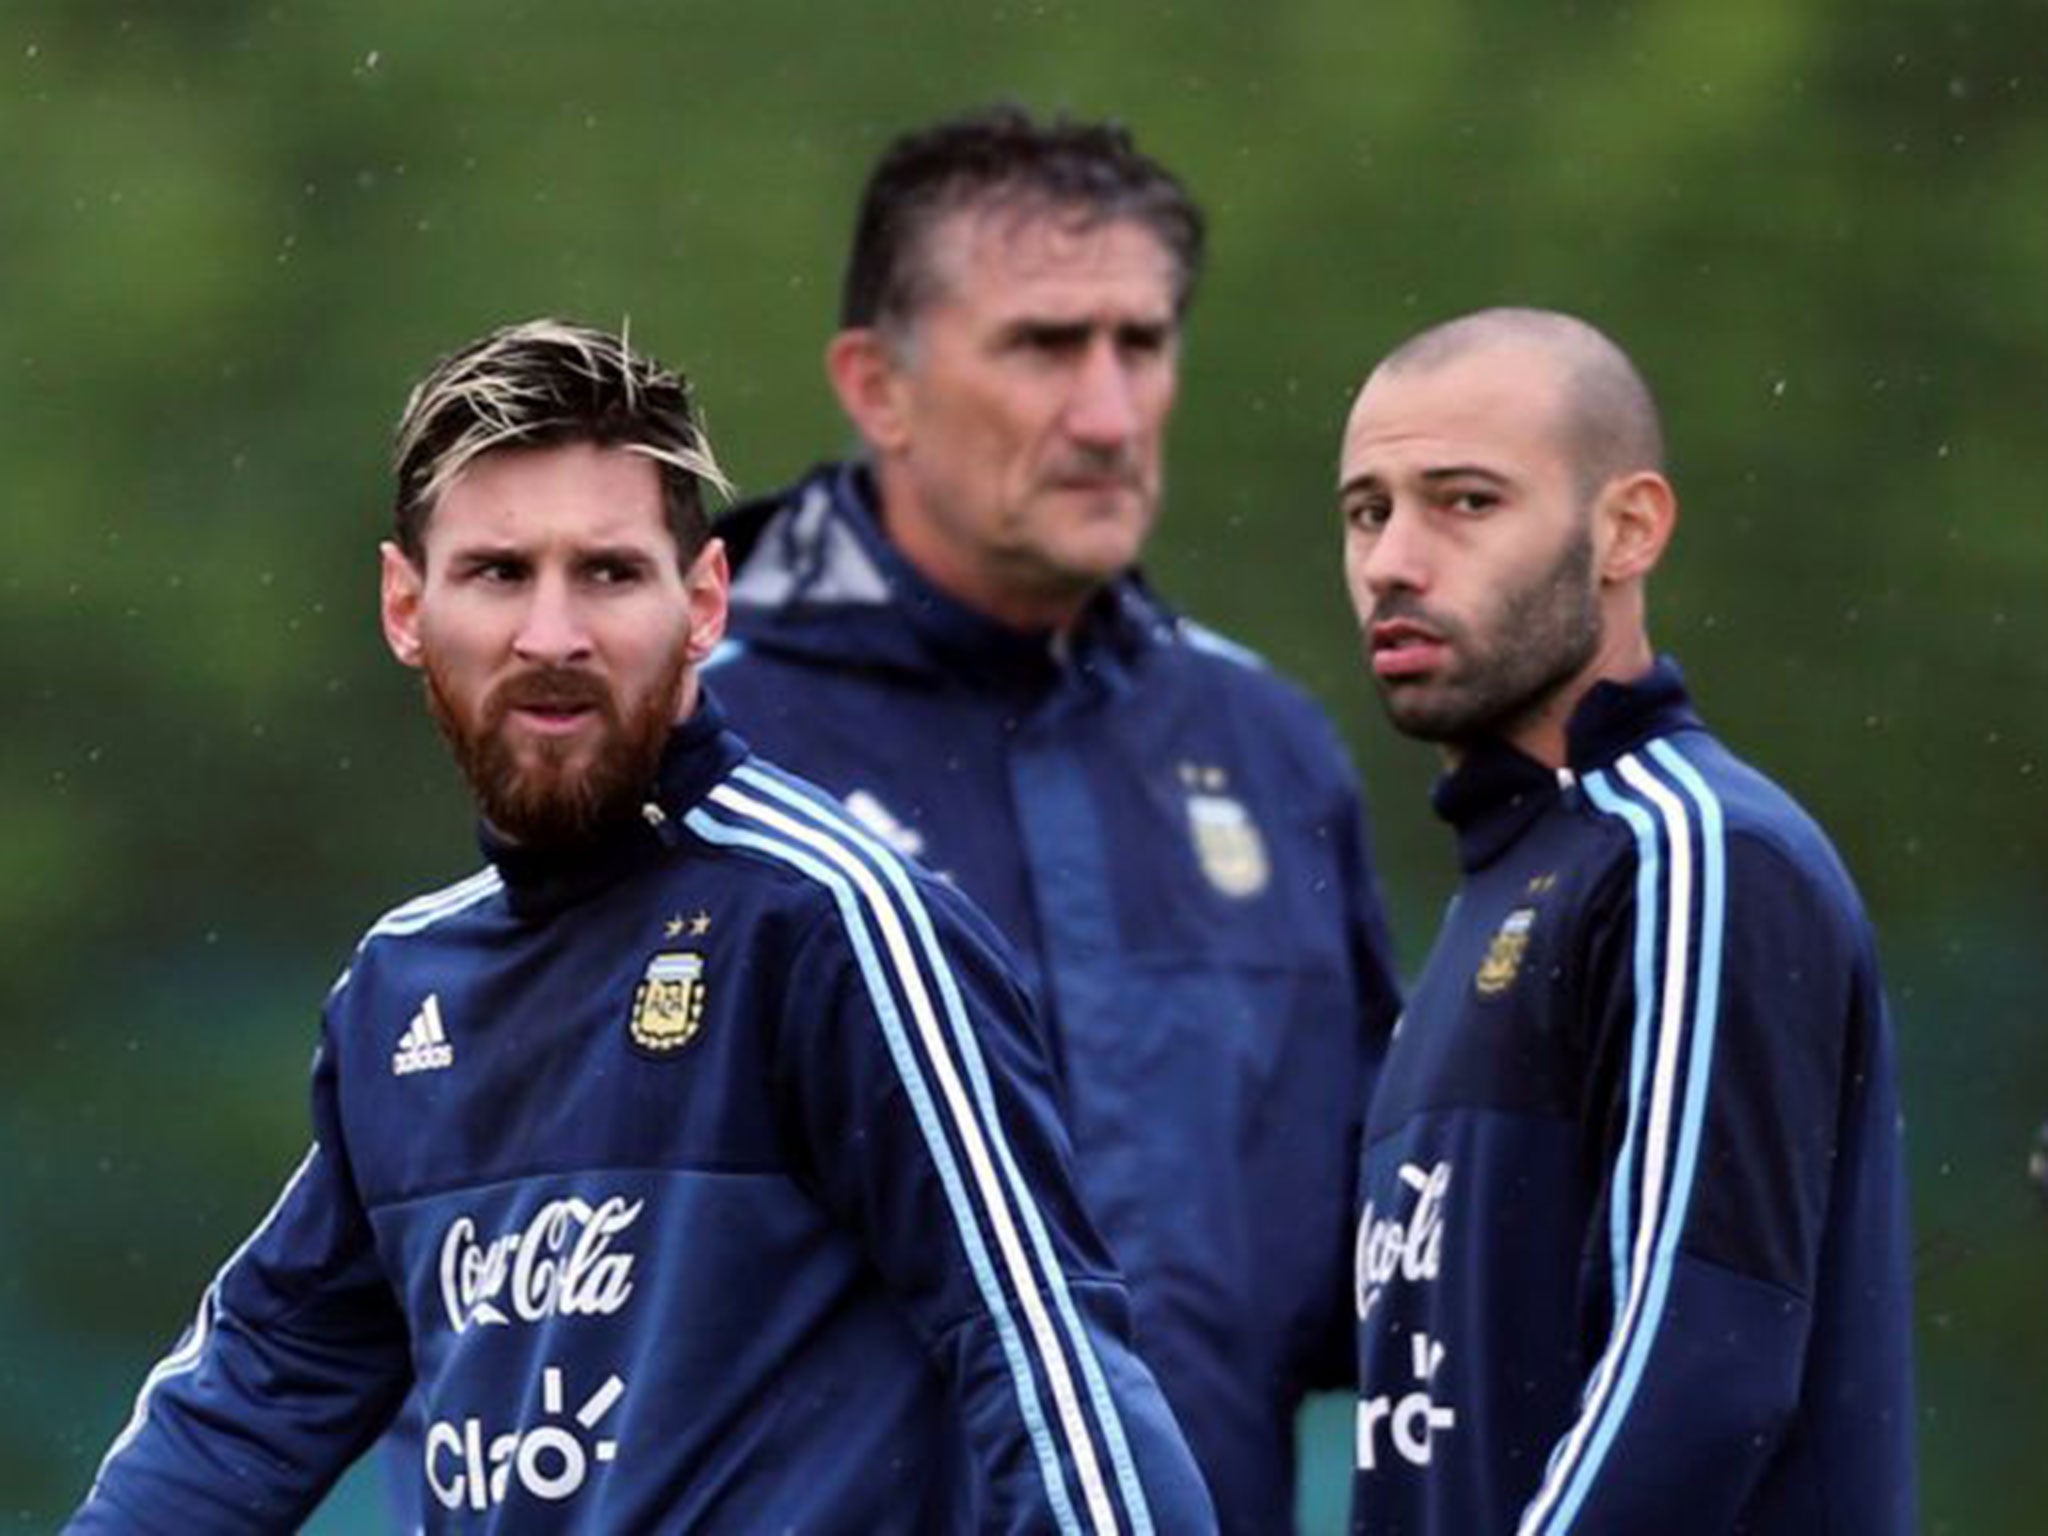 Javier Mascerano (right) has bore the brunt of the criticism while Lionel Messi has led a media blackout